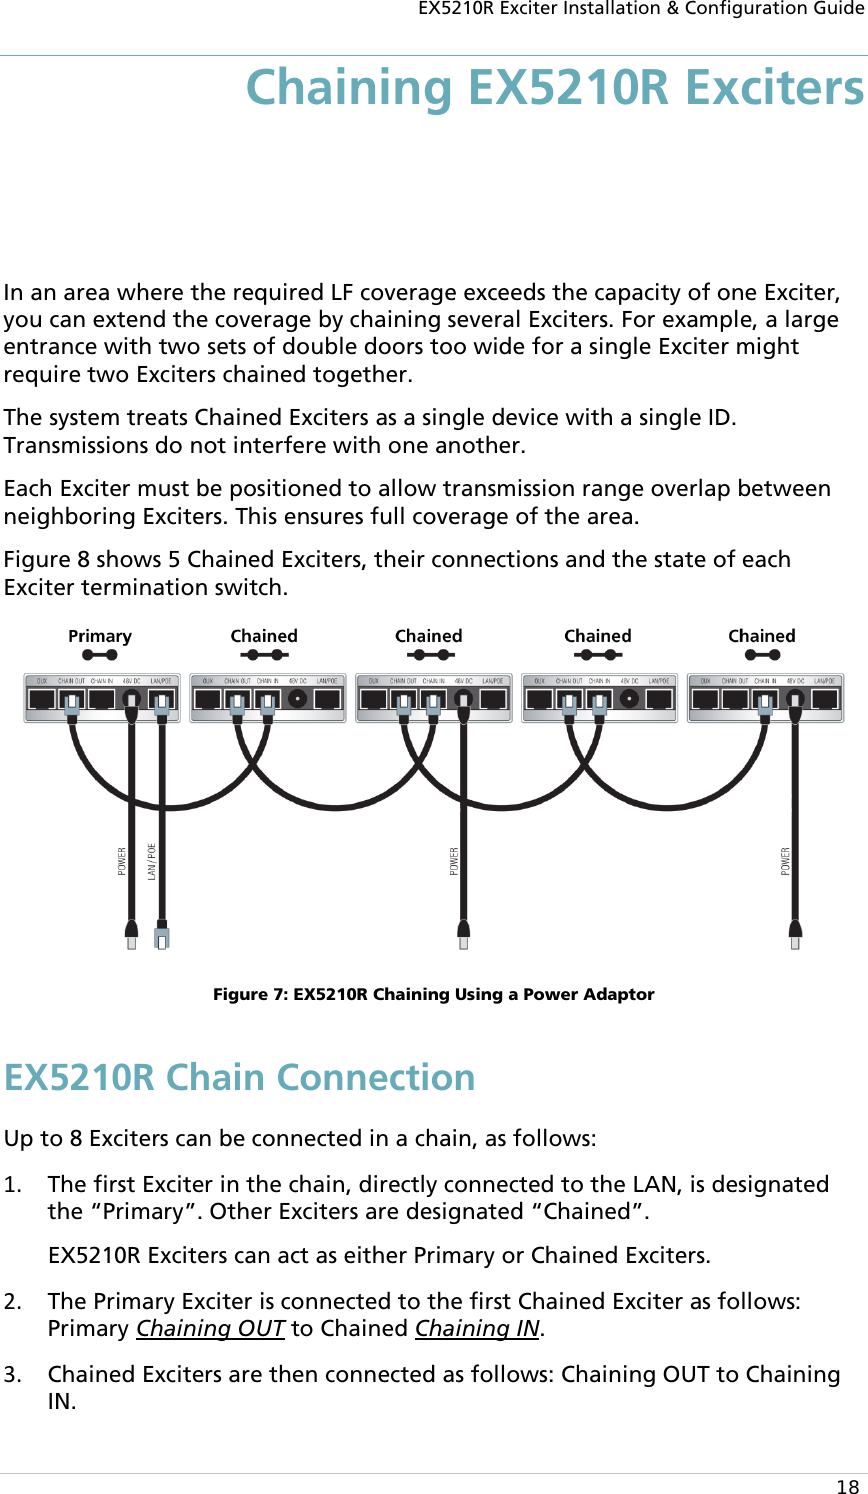 EX5210R Exciter Installation &amp; Configuration Guide  18 Chaining EX5210R Exciters In an area where the required LF coverage exceeds the capacity of one Exciter, you can extend the coverage by chaining several Exciters. For example, a large entrance with two sets of double doors too wide for a single Exciter might require two Exciters chained together.  The system treats Chained Exciters as a single device with a single ID. Transmissions do not interfere with one another.  Each Exciter must be positioned to allow transmission range overlap between neighboring Exciters. This ensures full coverage of the area. Figure 8 shows 5 Chained Exciters, their connections and the state of each Exciter termination switch.  Figure 7: EX5210R Chaining Using a Power Adaptor EX5210R Chain Connection Up to 8 Exciters can be connected in a chain, as follows: 1. The first Exciter in the chain, directly connected to the LAN, is designated the “Primary”. Other Exciters are designated “Chained”.  EX5210R Exciters can act as either Primary or Chained Exciters. 2. The Primary Exciter is connected to the first Chained Exciter as follows: Primary Chaining OUT to Chained Chaining IN. 3. Chained Exciters are then connected as follows: Chaining OUT to Chaining IN. 